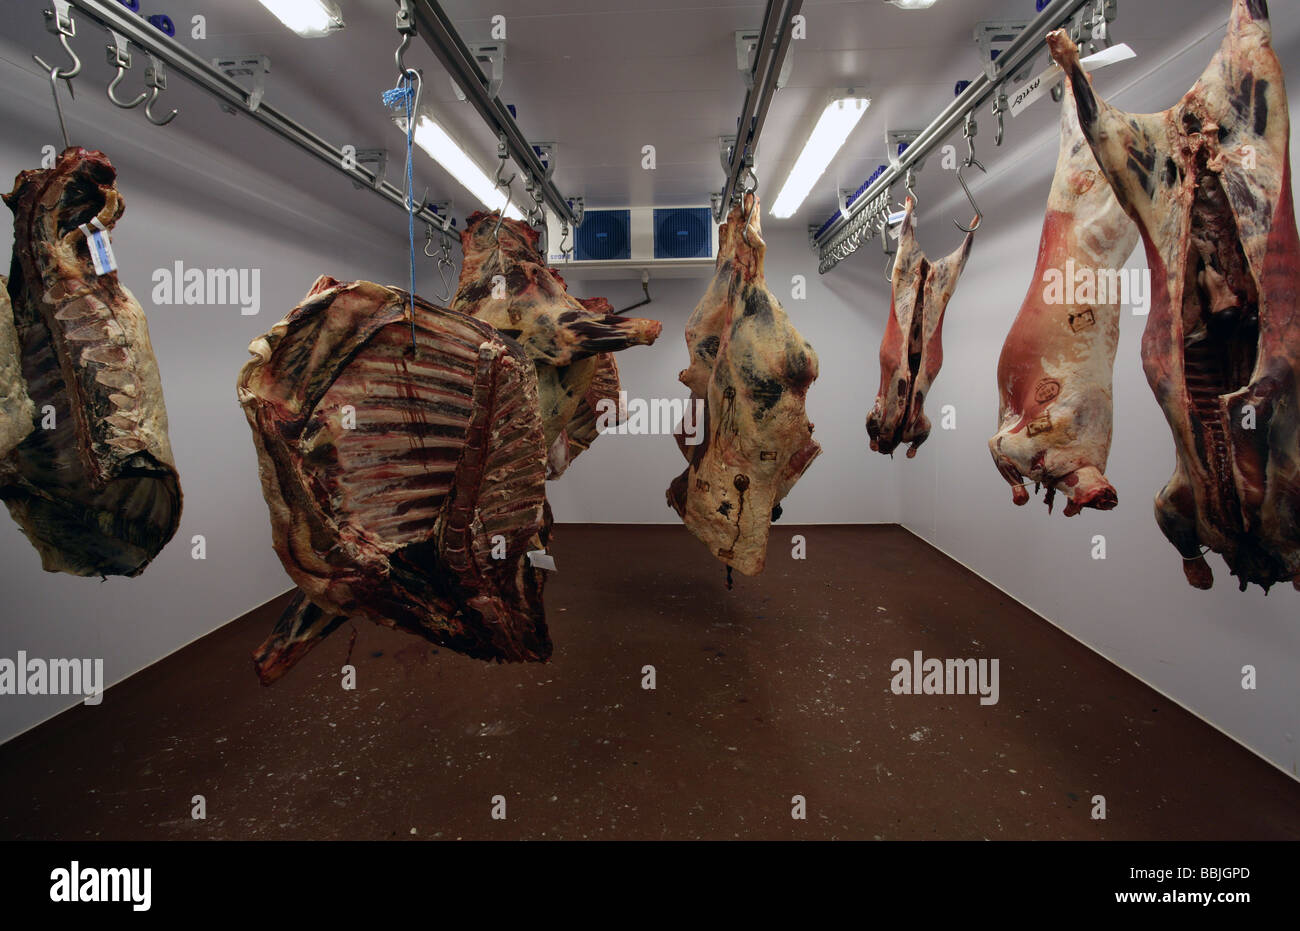 Organic meat carcases in butcher's cold store Stock Photo